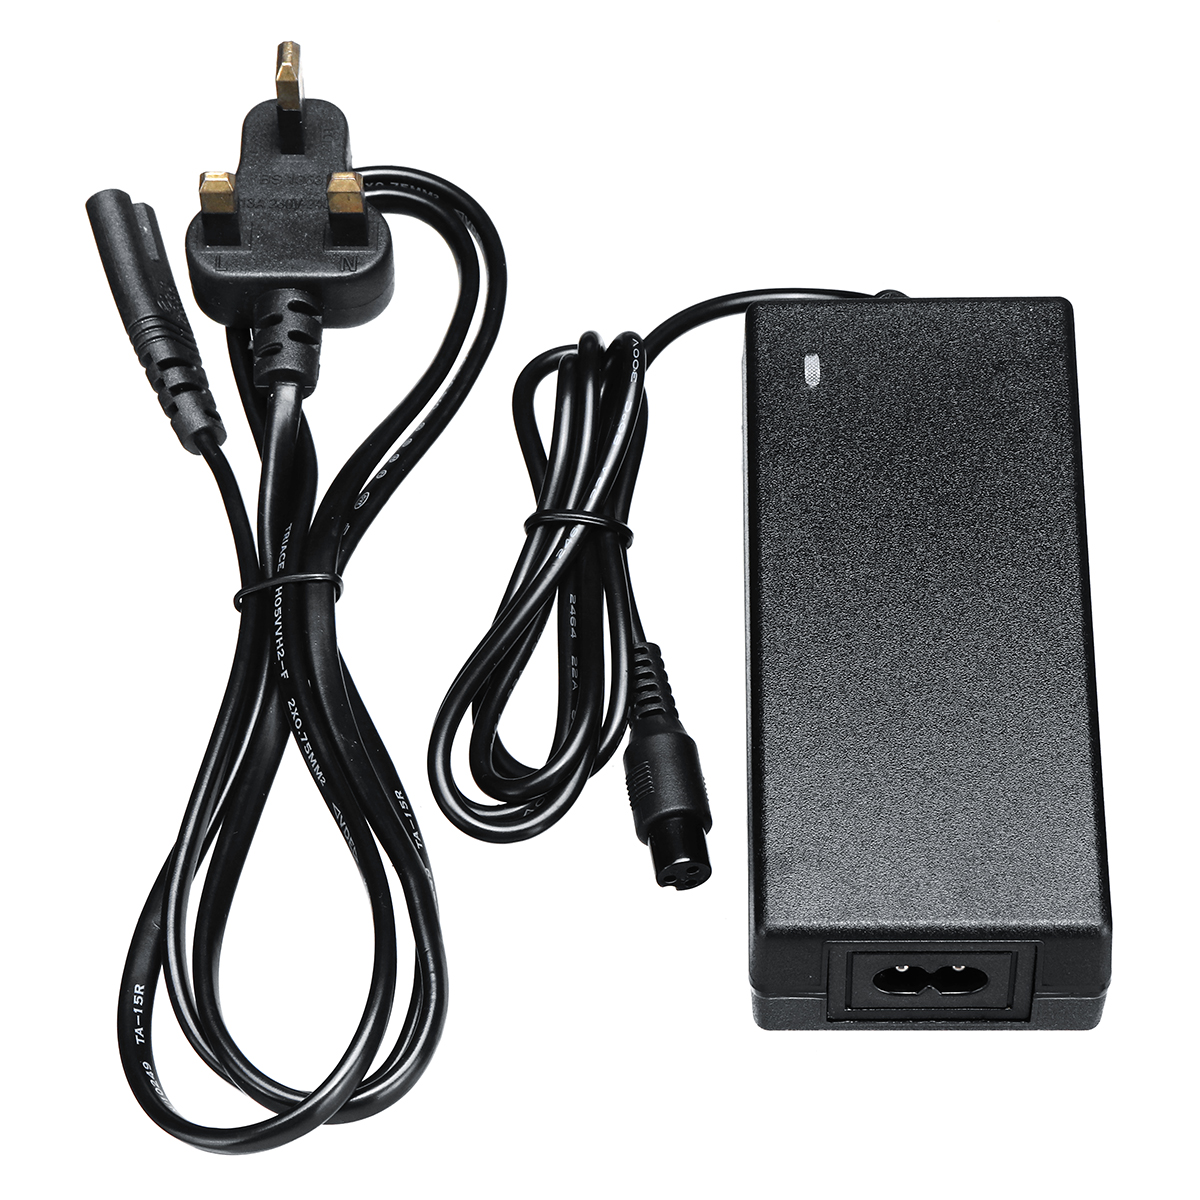 42V-2A-Power-Adapter-Battery-Charger-For-2-Wheel-Electric-Balance-Scooter-UK-Plug-1368826-4